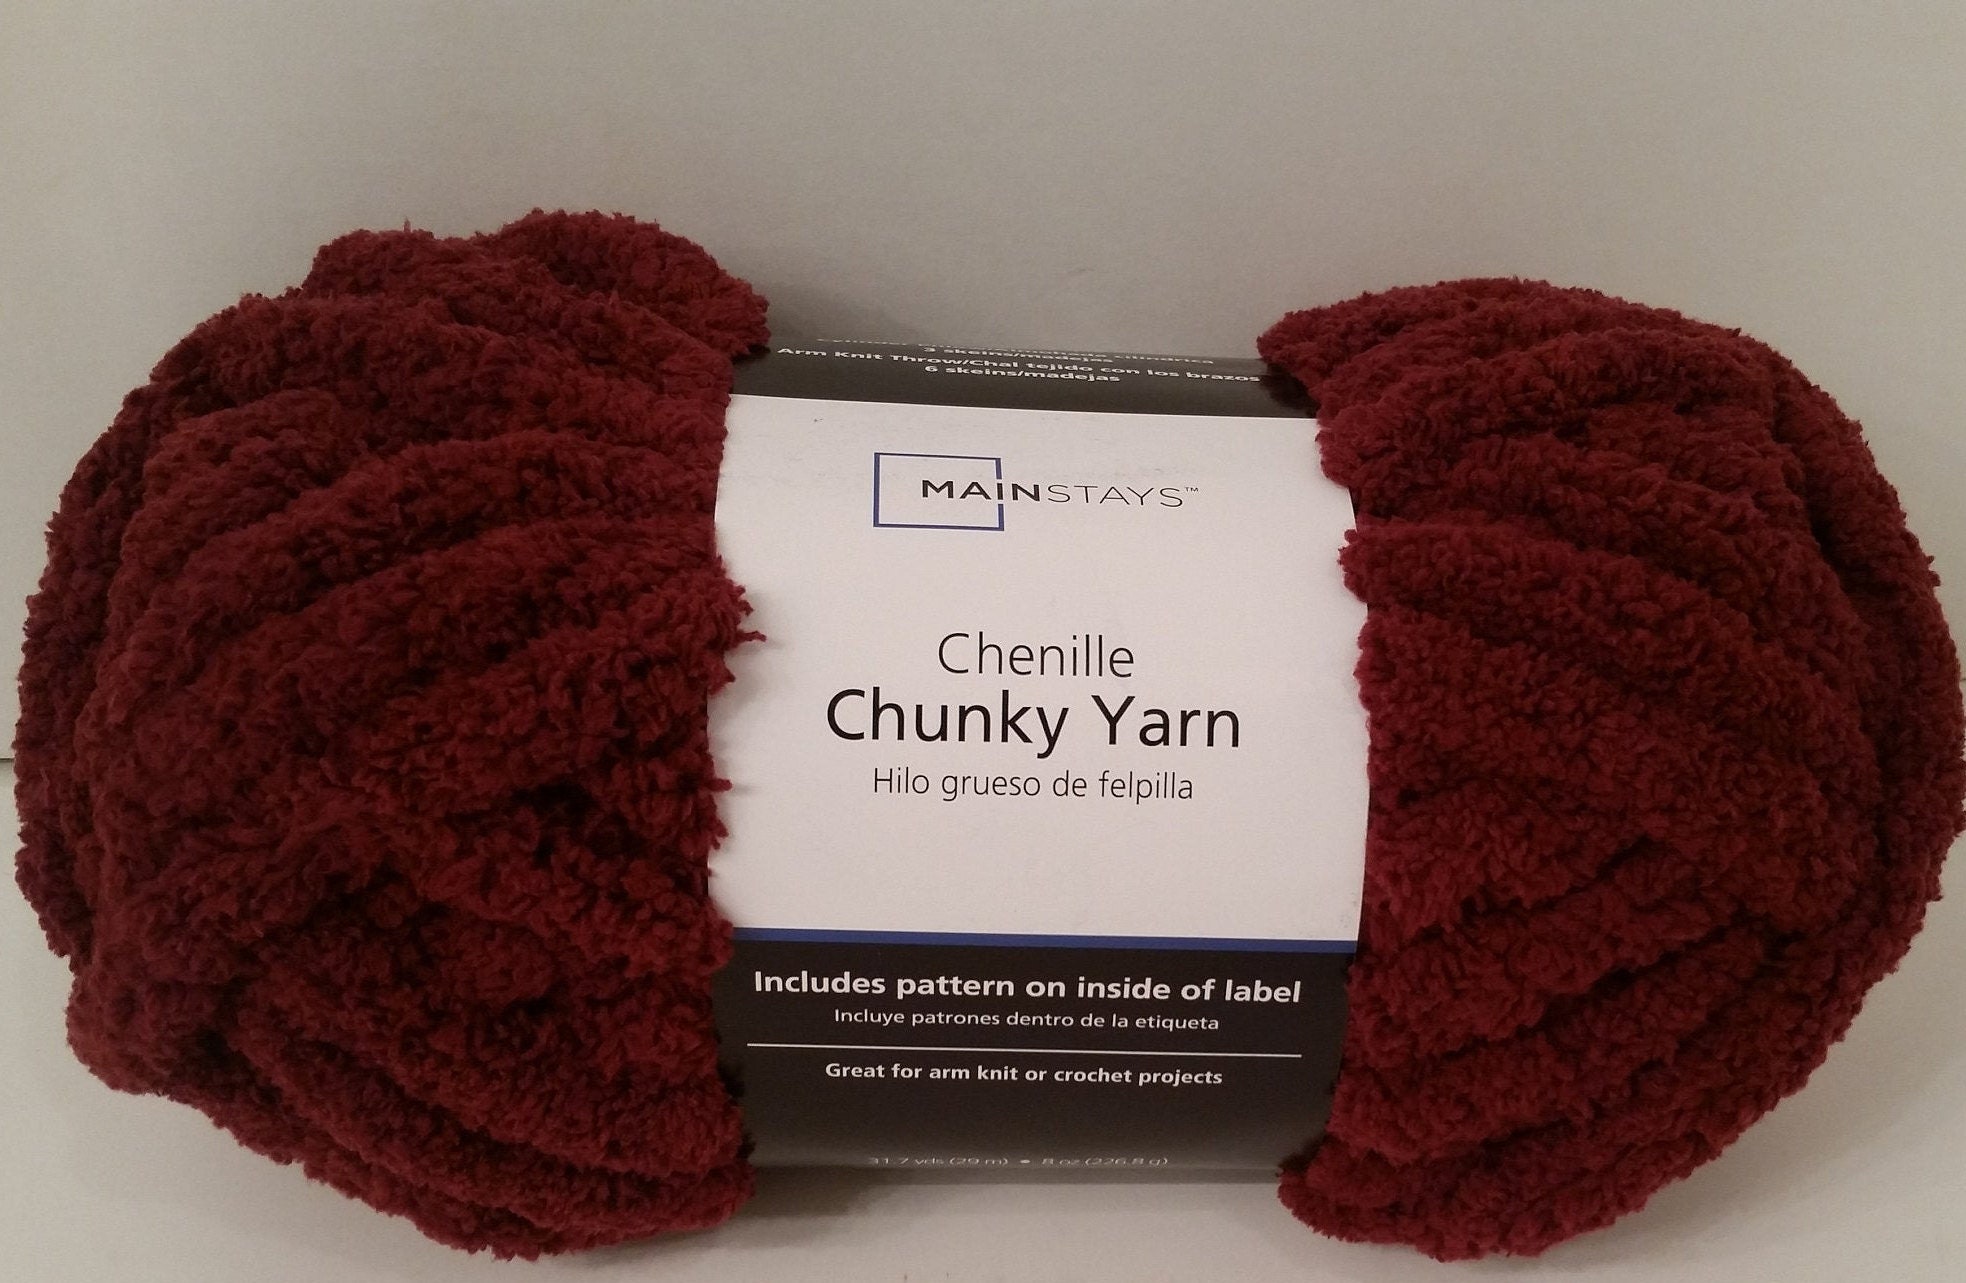 1 Skein 3 Skeins Available Mainstays Chenille Chunky Yarn, Heritage Russet,  Lot 20N 8oz/226.8g, 31.7y/29m, Polyester, Super Bulky 6 